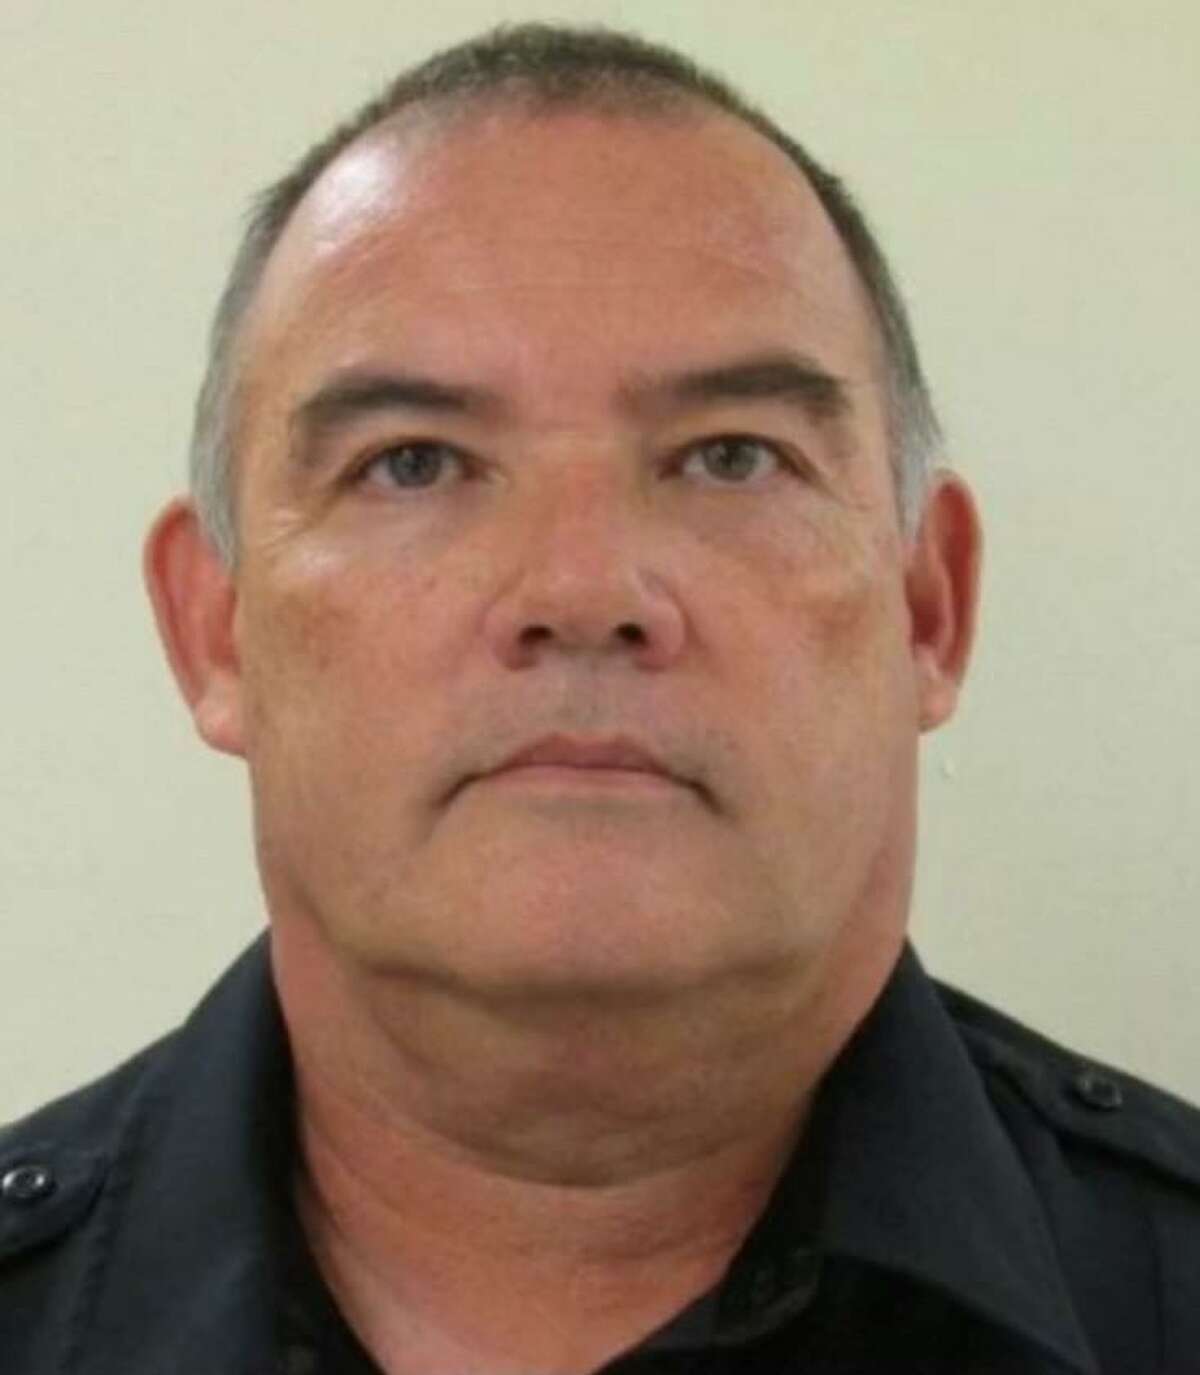 Deputy Ronald Butler, 56, died of complications from the virus Friday afternoon, officials said.